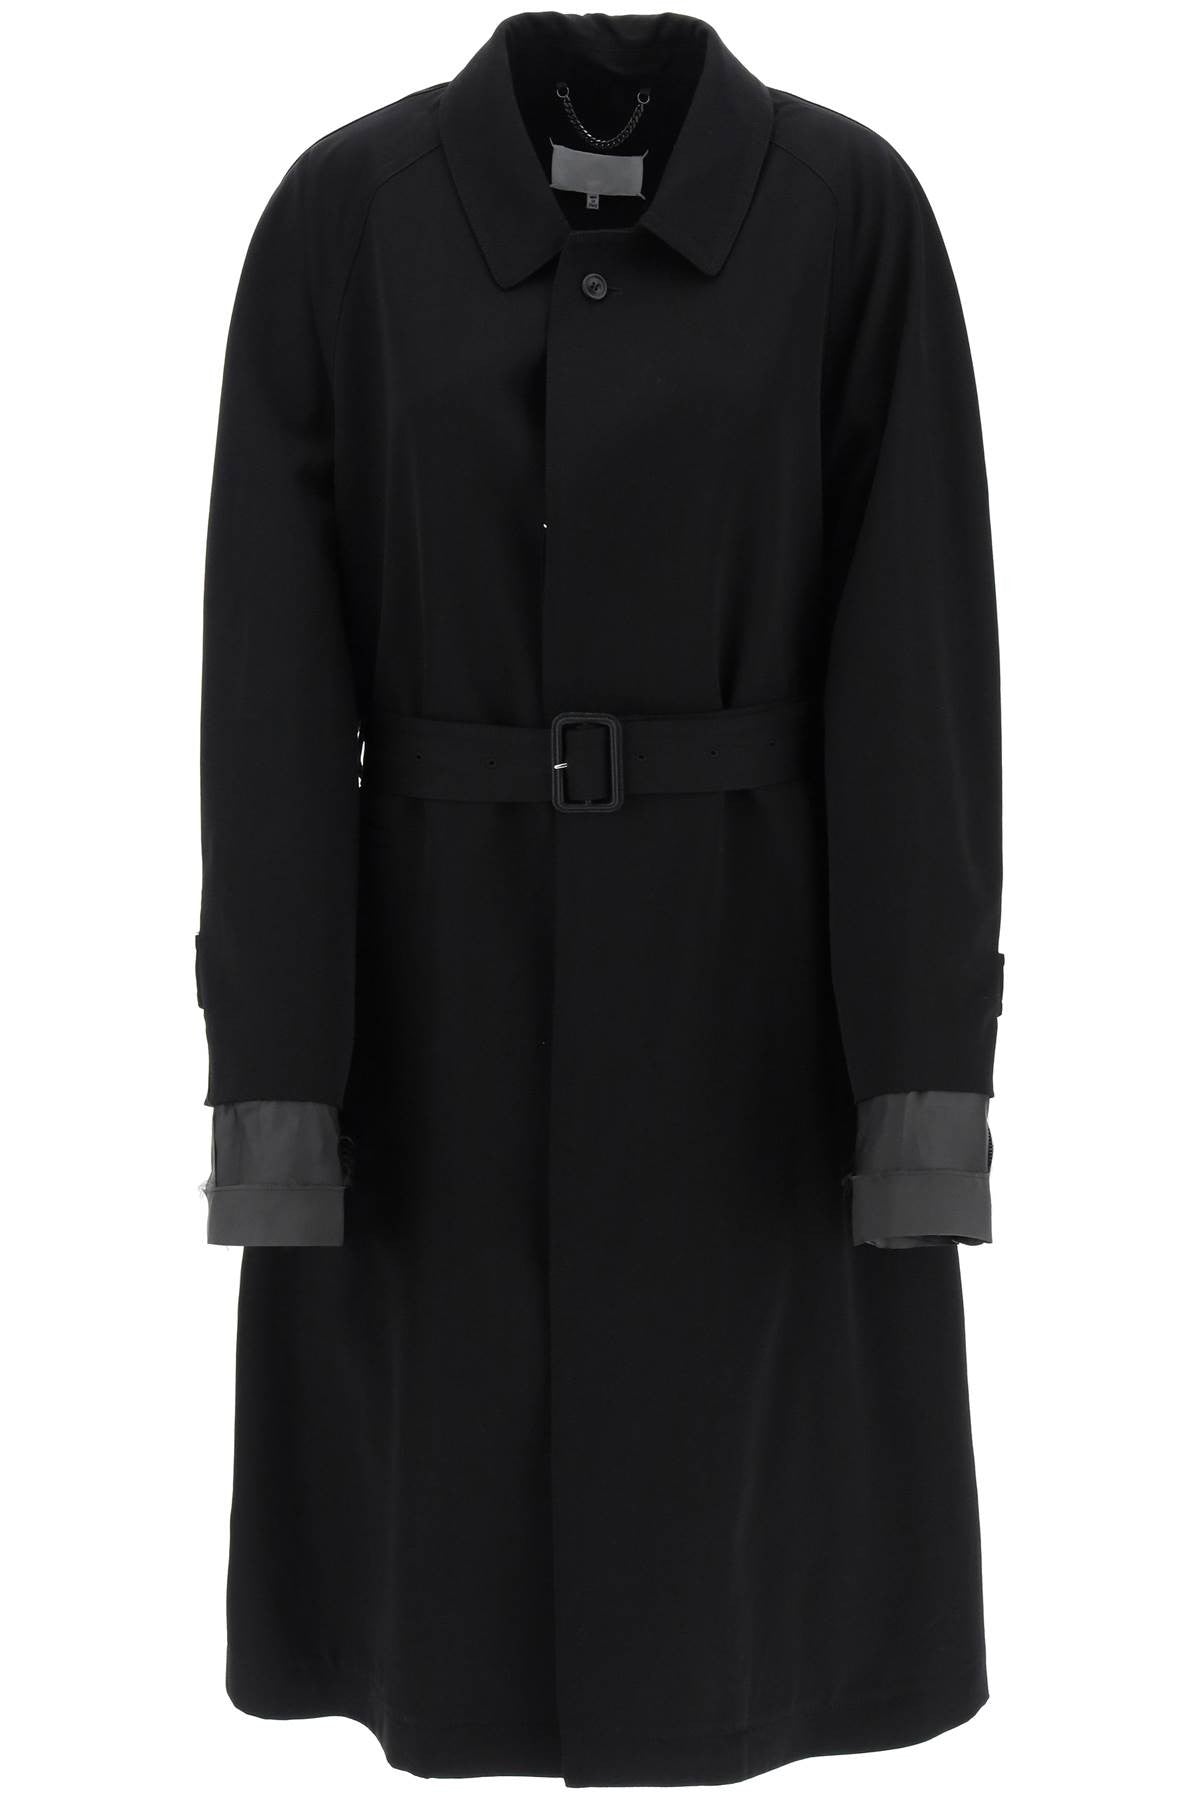 "trench coat with discreet